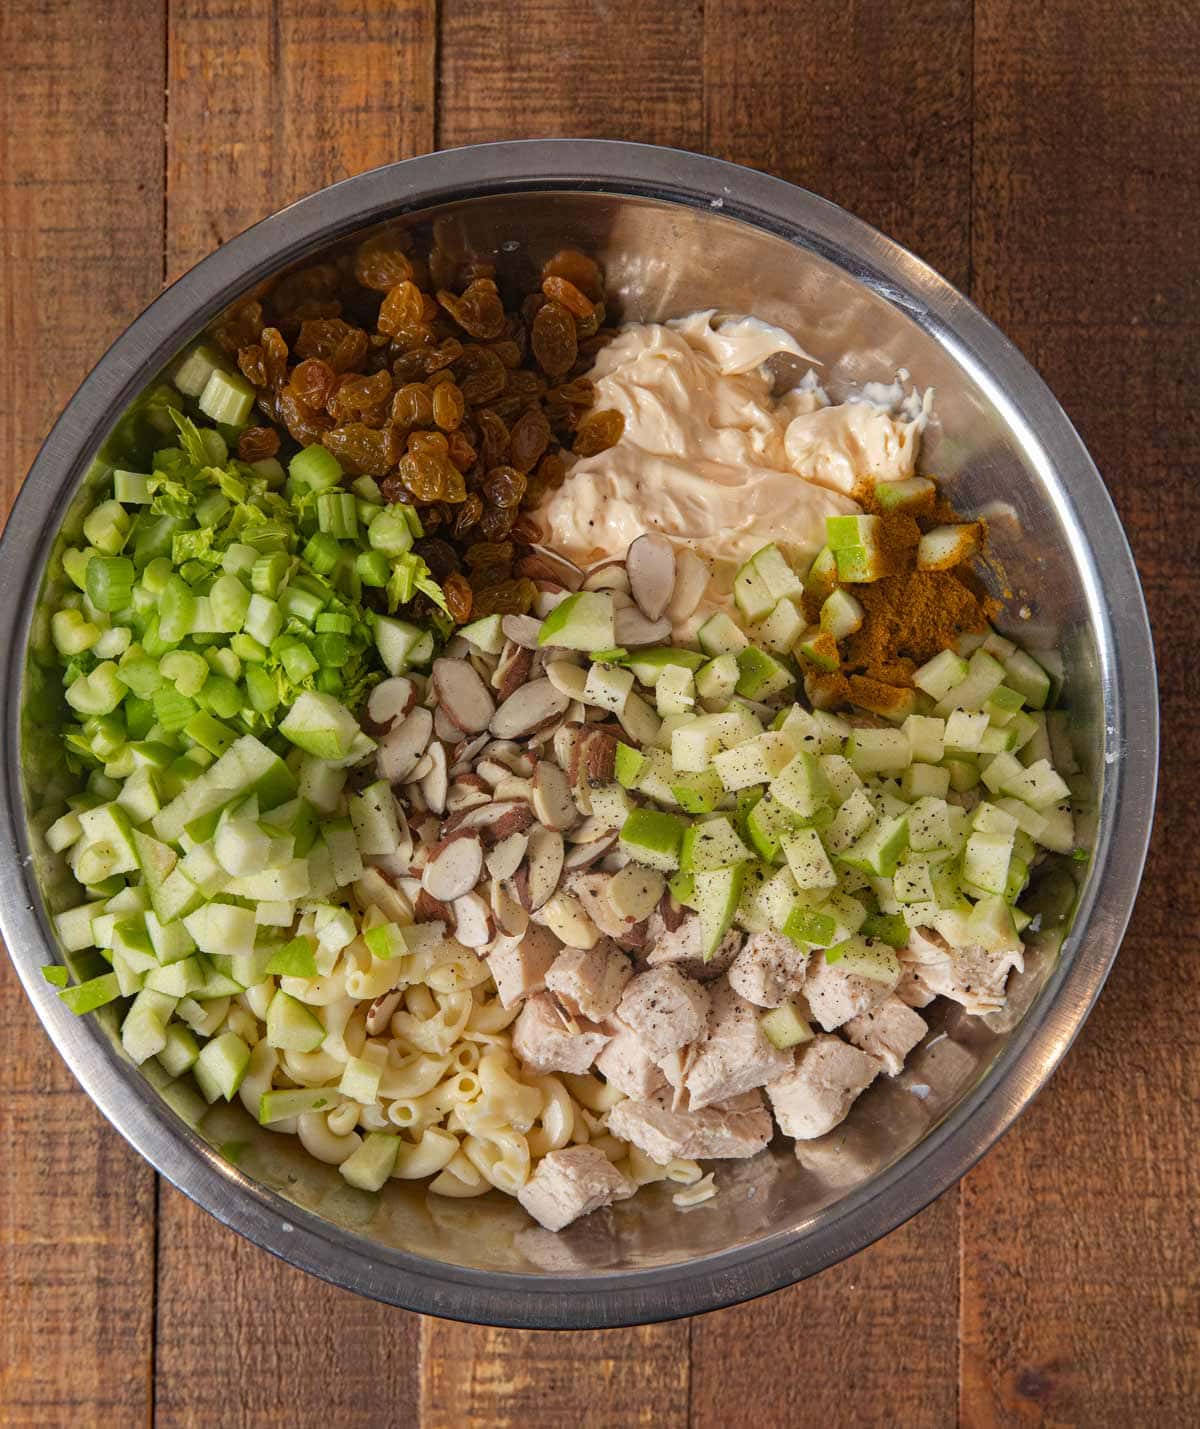 Curried Chicken Pasta Salad ingredients in mixing bowl